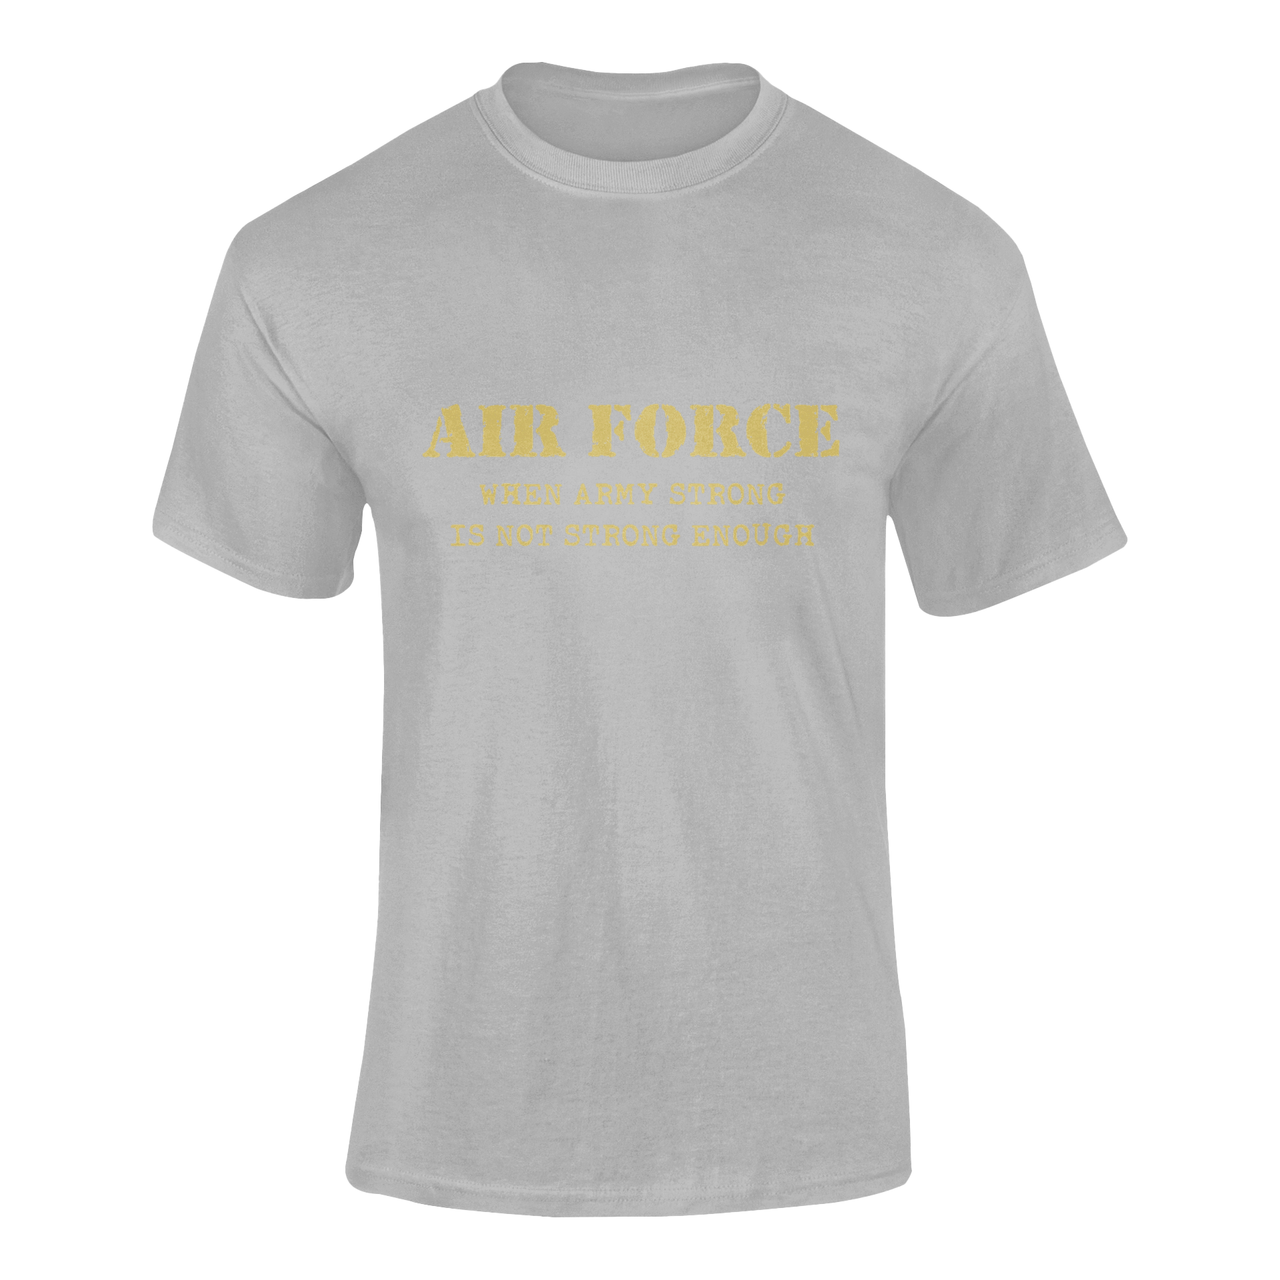 Military T-shirt - Air Force When Army Strong Is Not Strong Enough (Men)